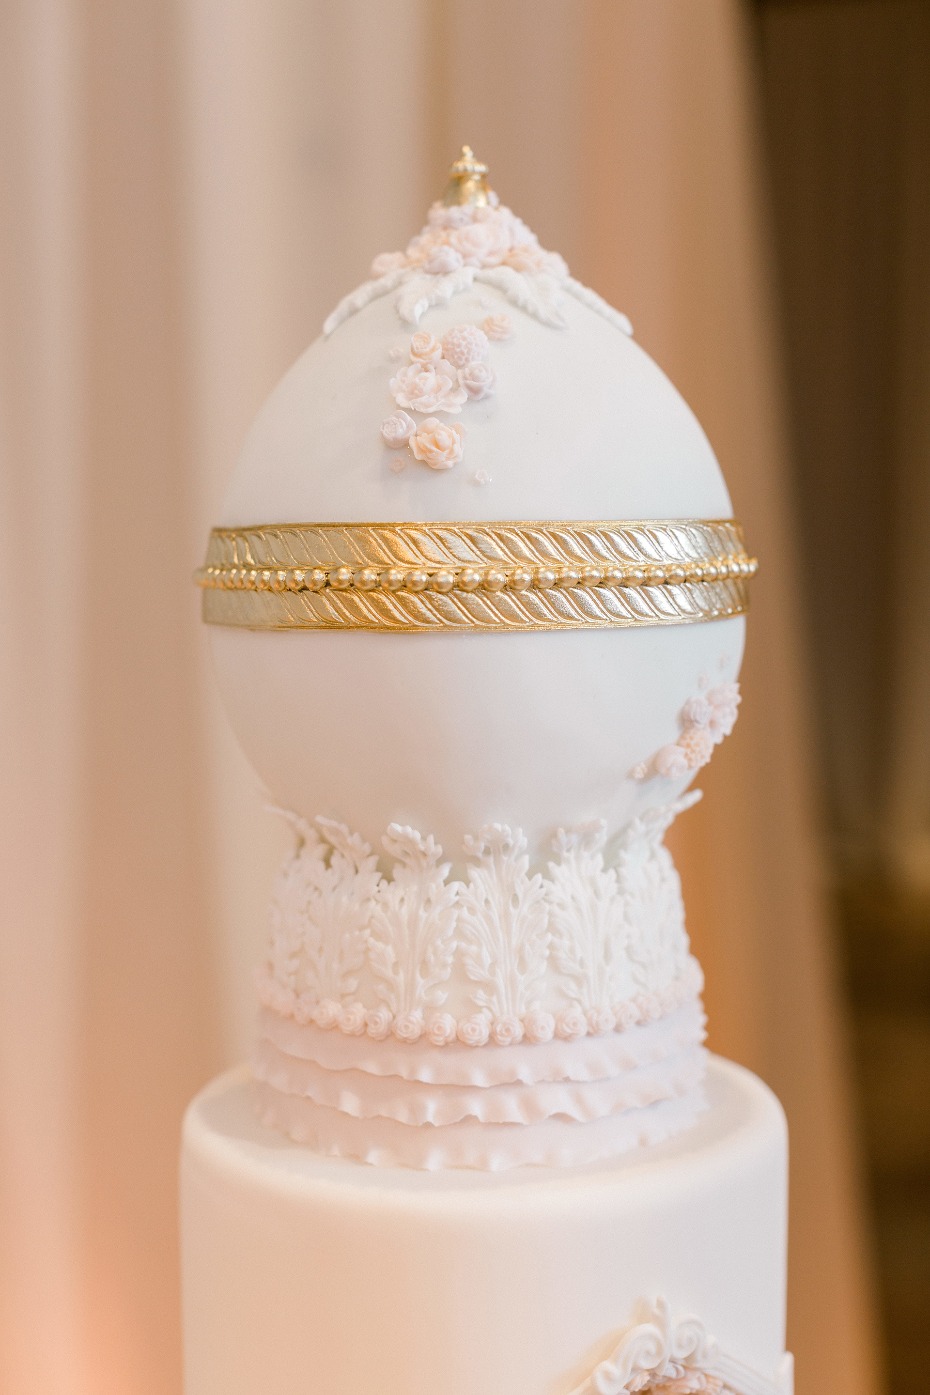 Gold and white faberge egg inspired cake